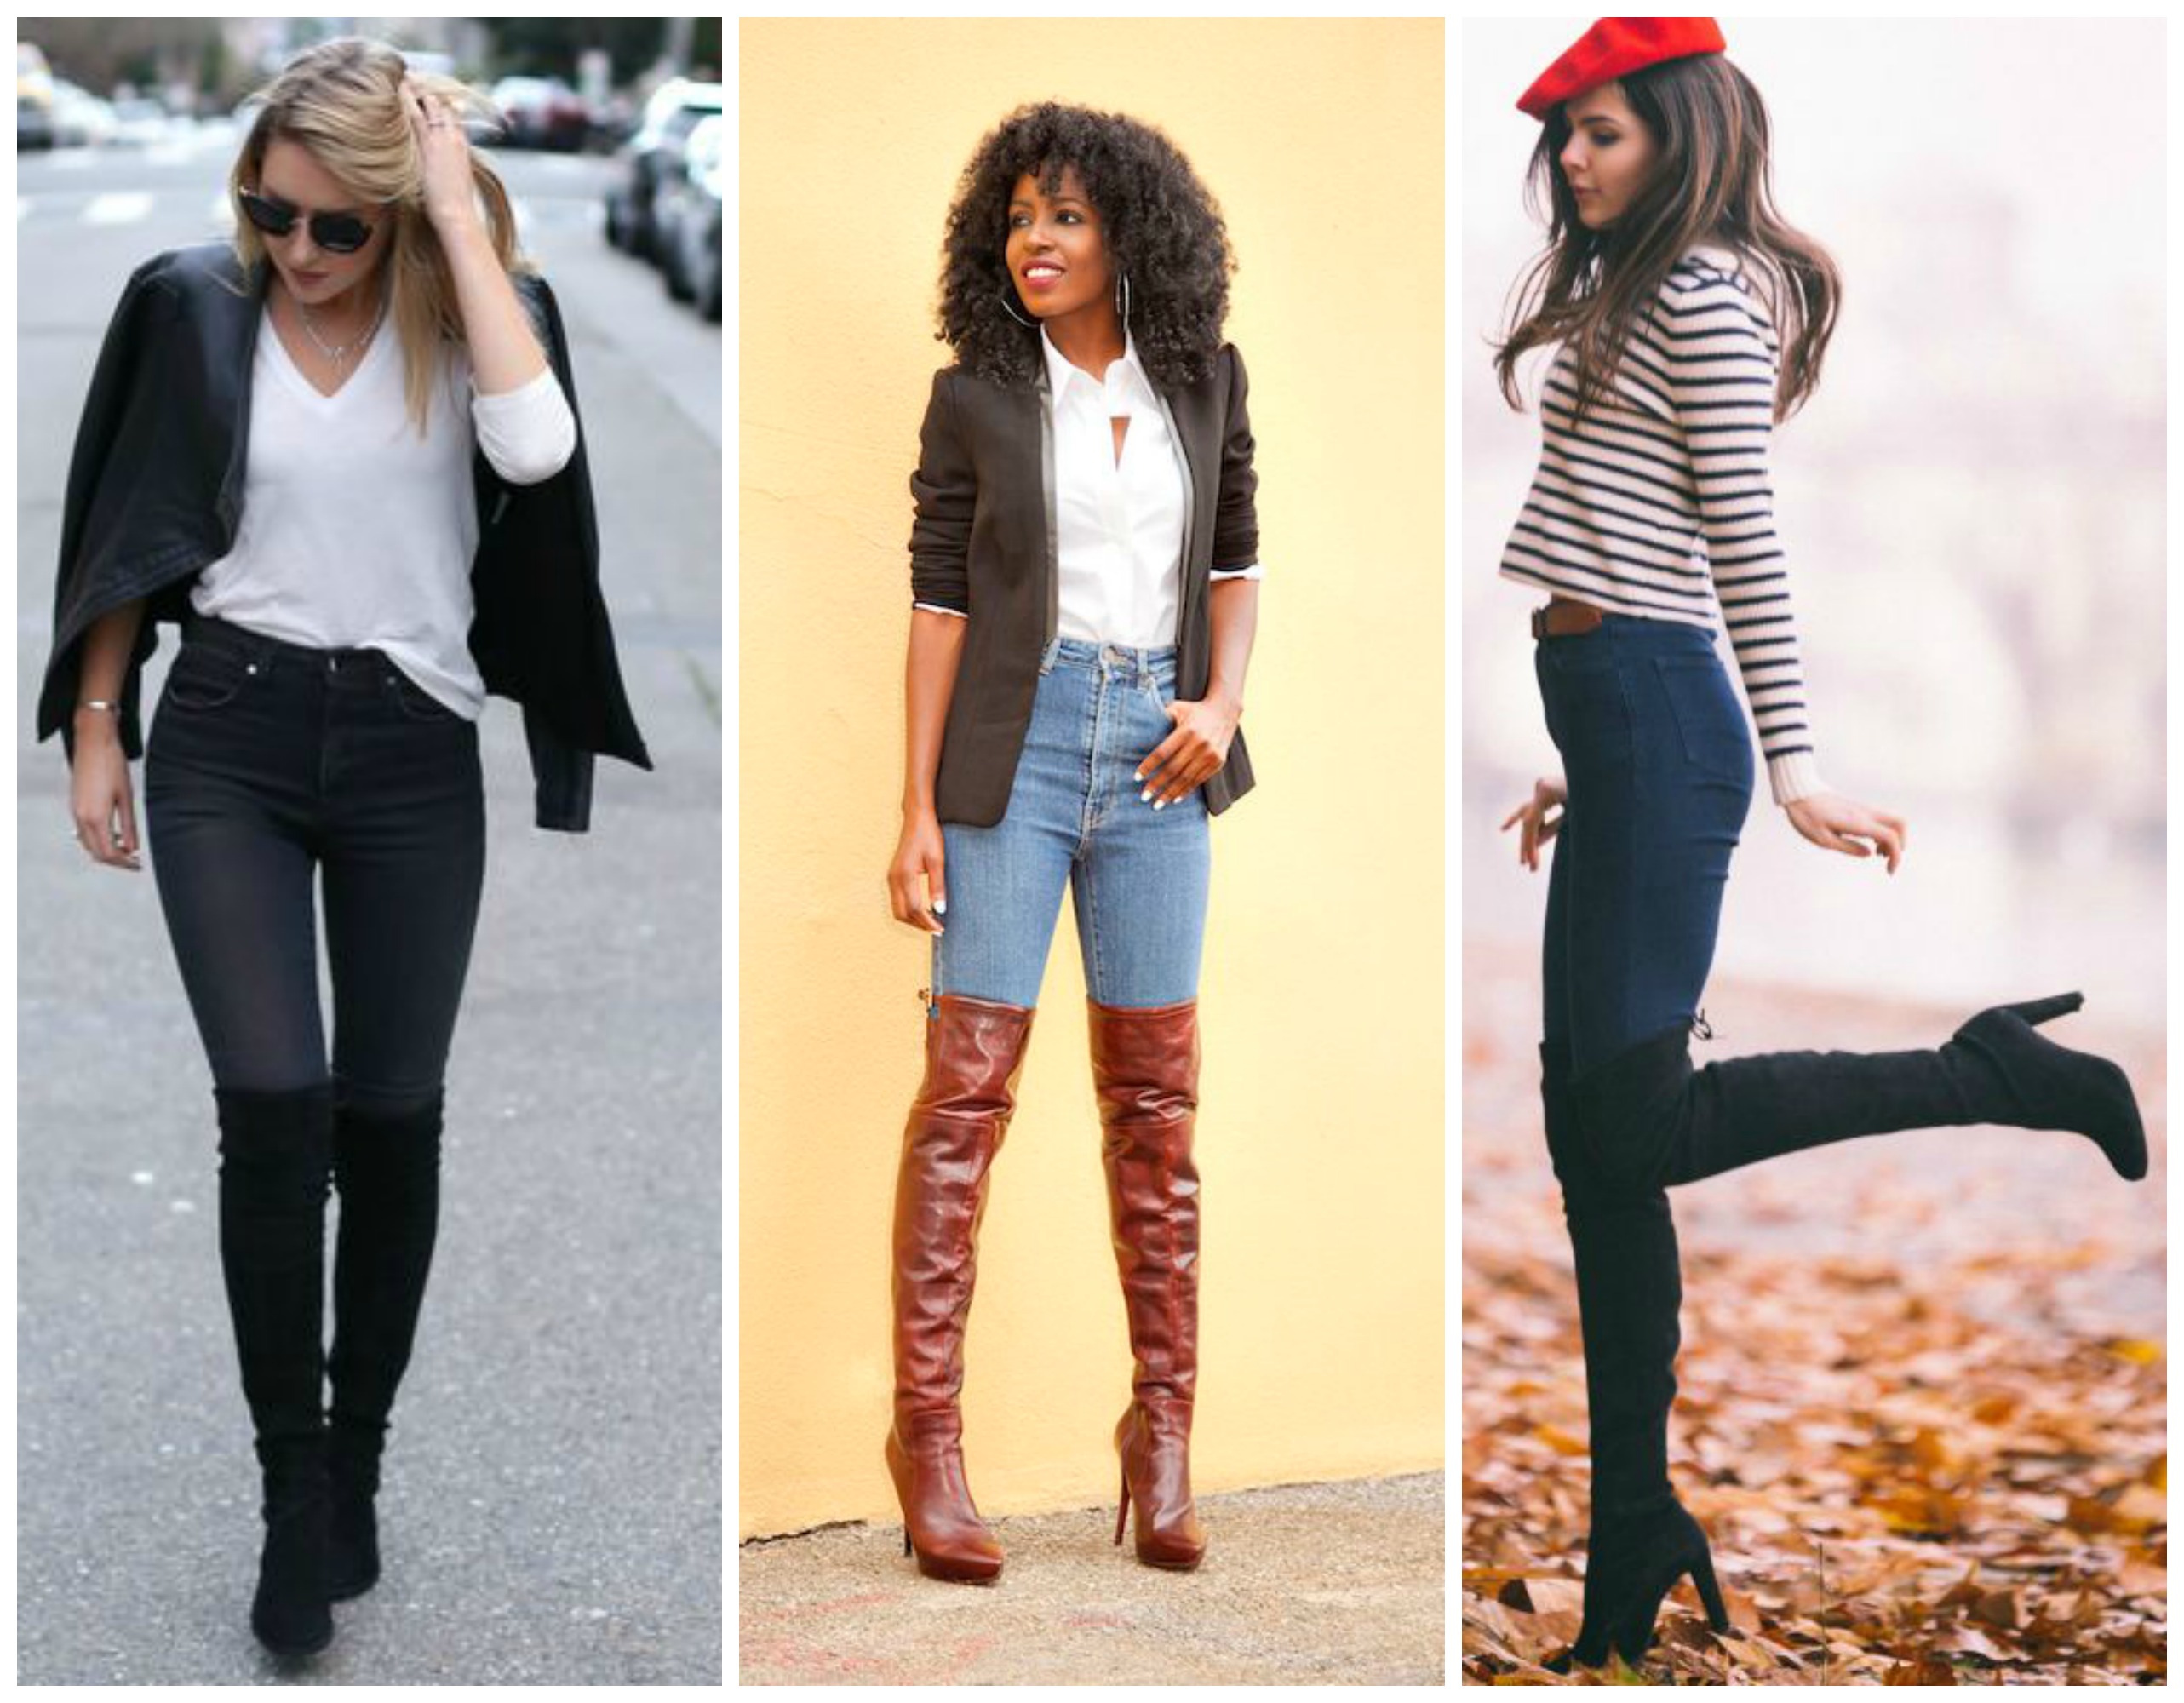 Shoes with Jeans - 31 Shoes To Wear With All Types Of Jeans